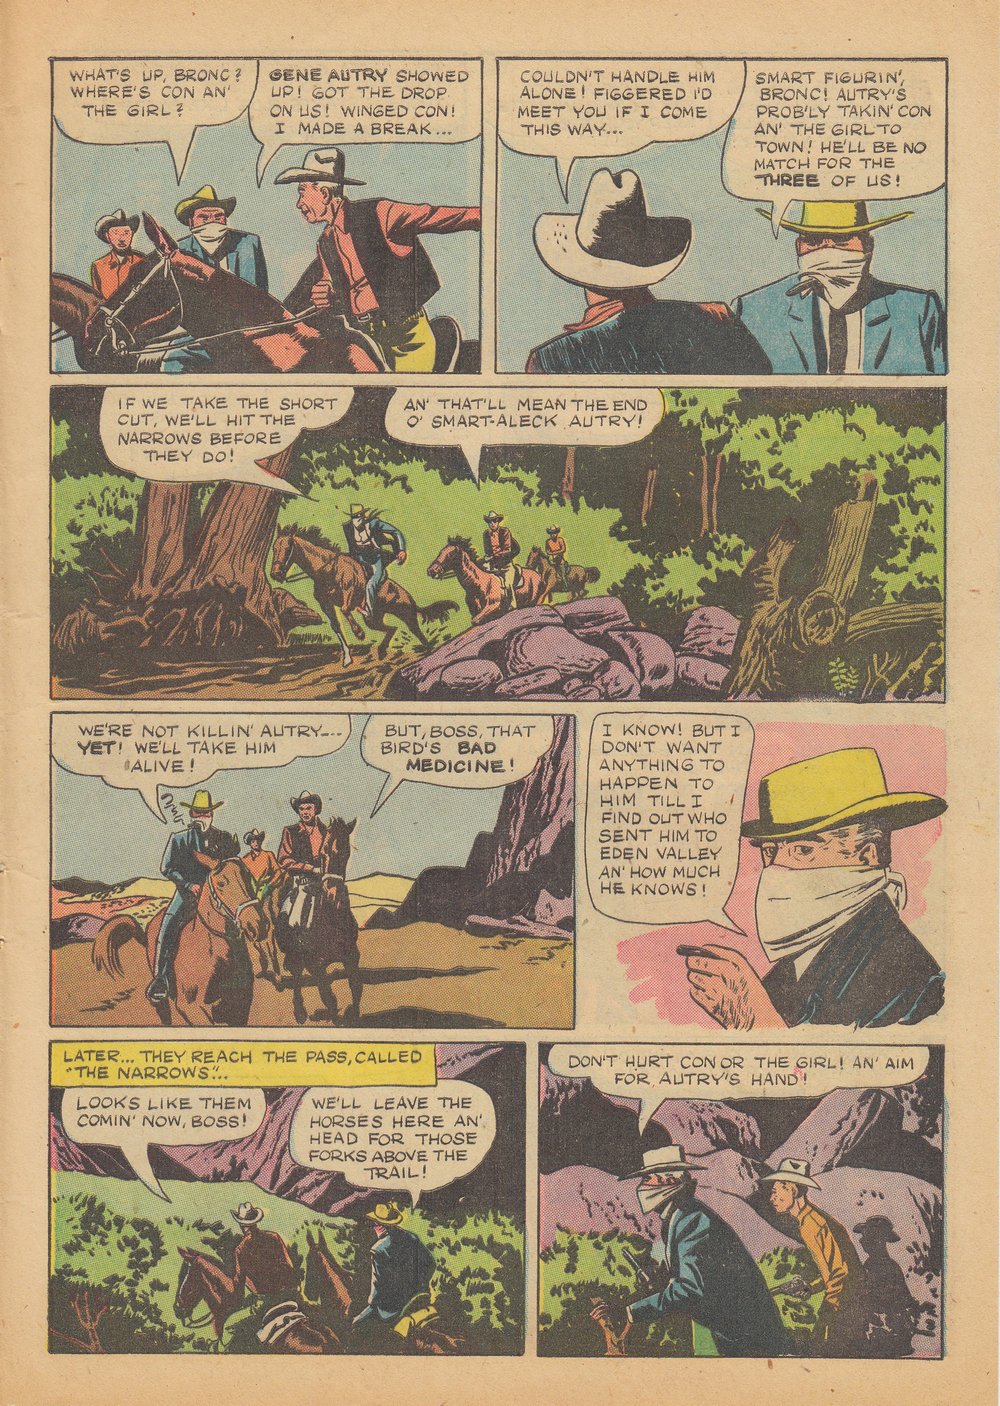 Gene Autry Comics (1946) issue 8 - Page 9